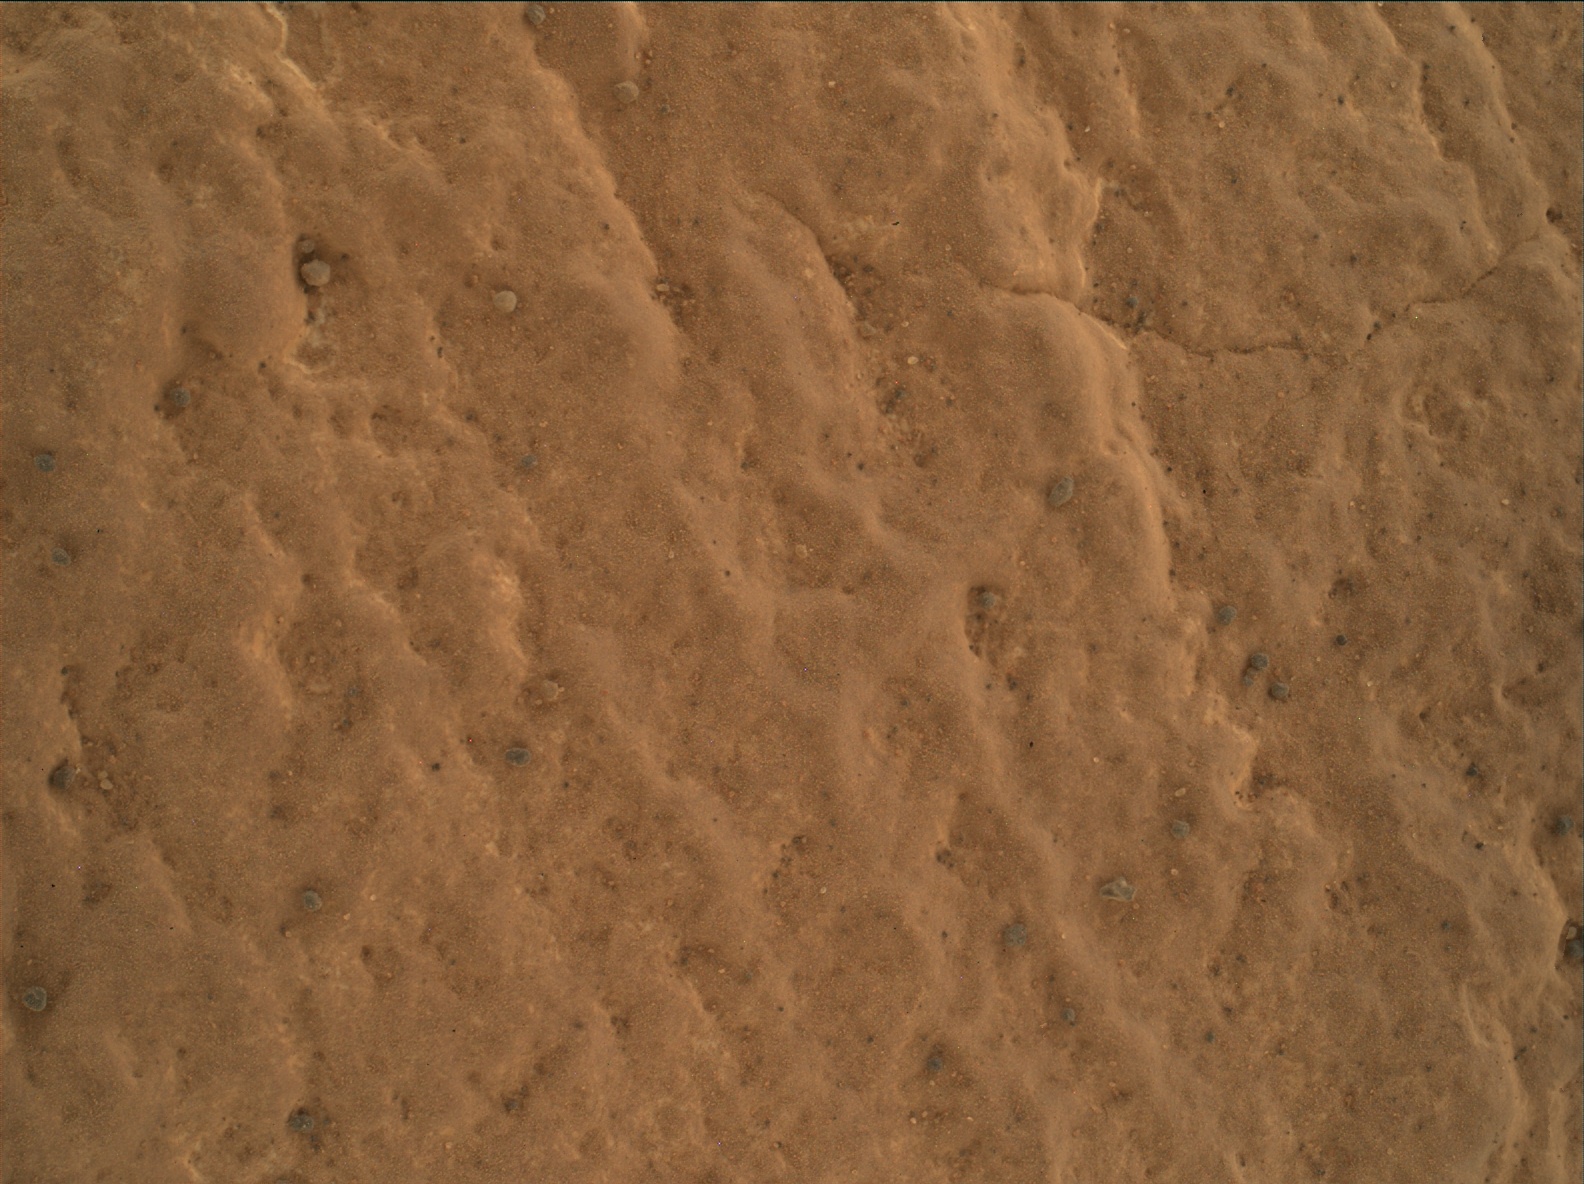 Nasa's Mars rover Curiosity acquired this image using its Mars Hand Lens Imager (MAHLI) on Sol 1729